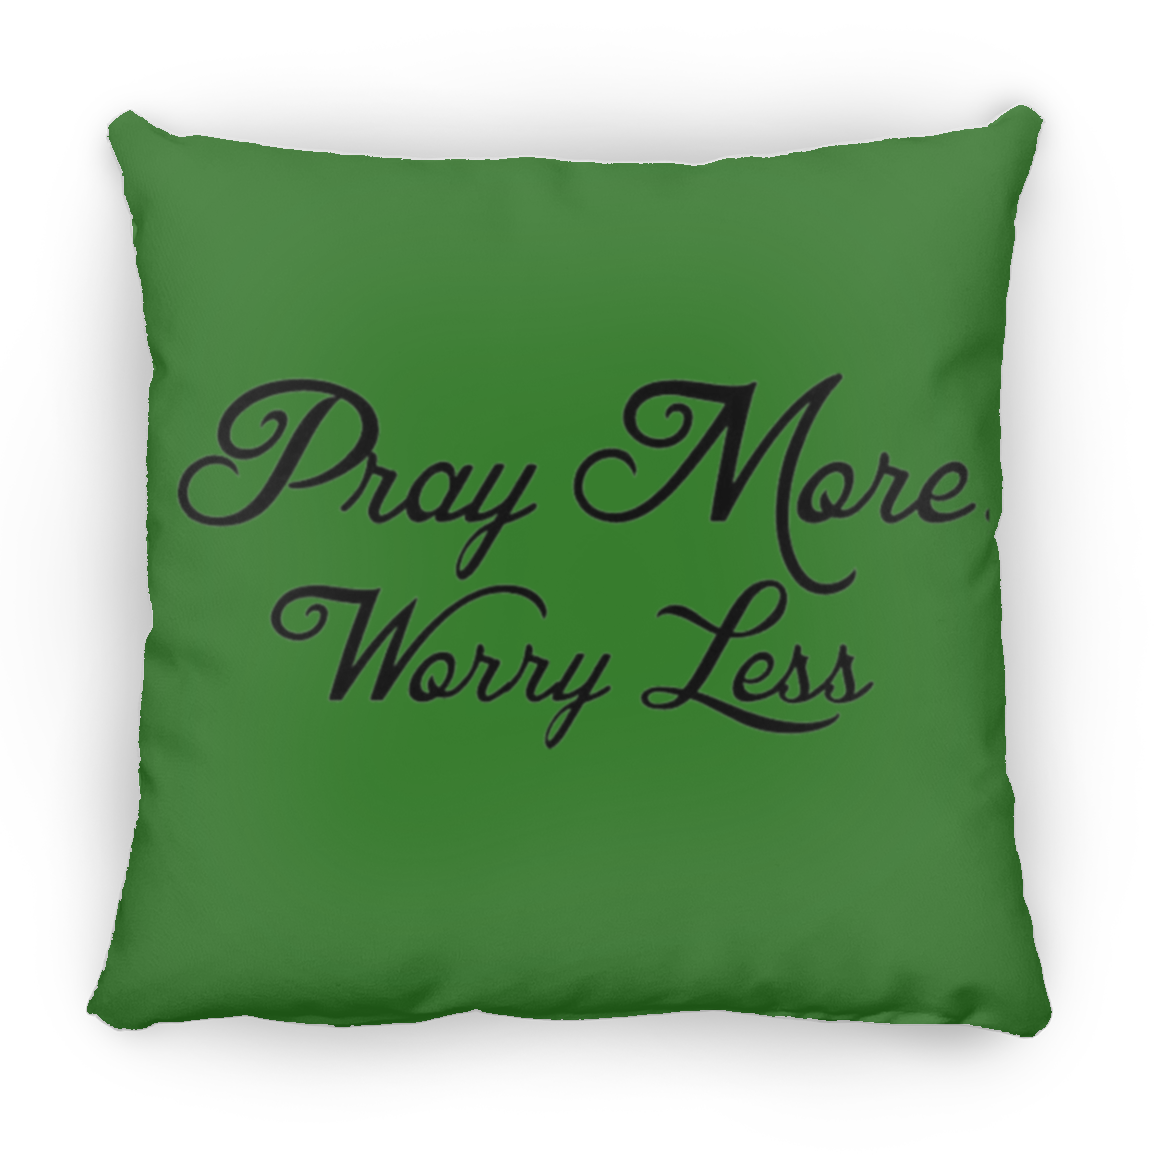 Pray More Worry Less Large Square Pillow